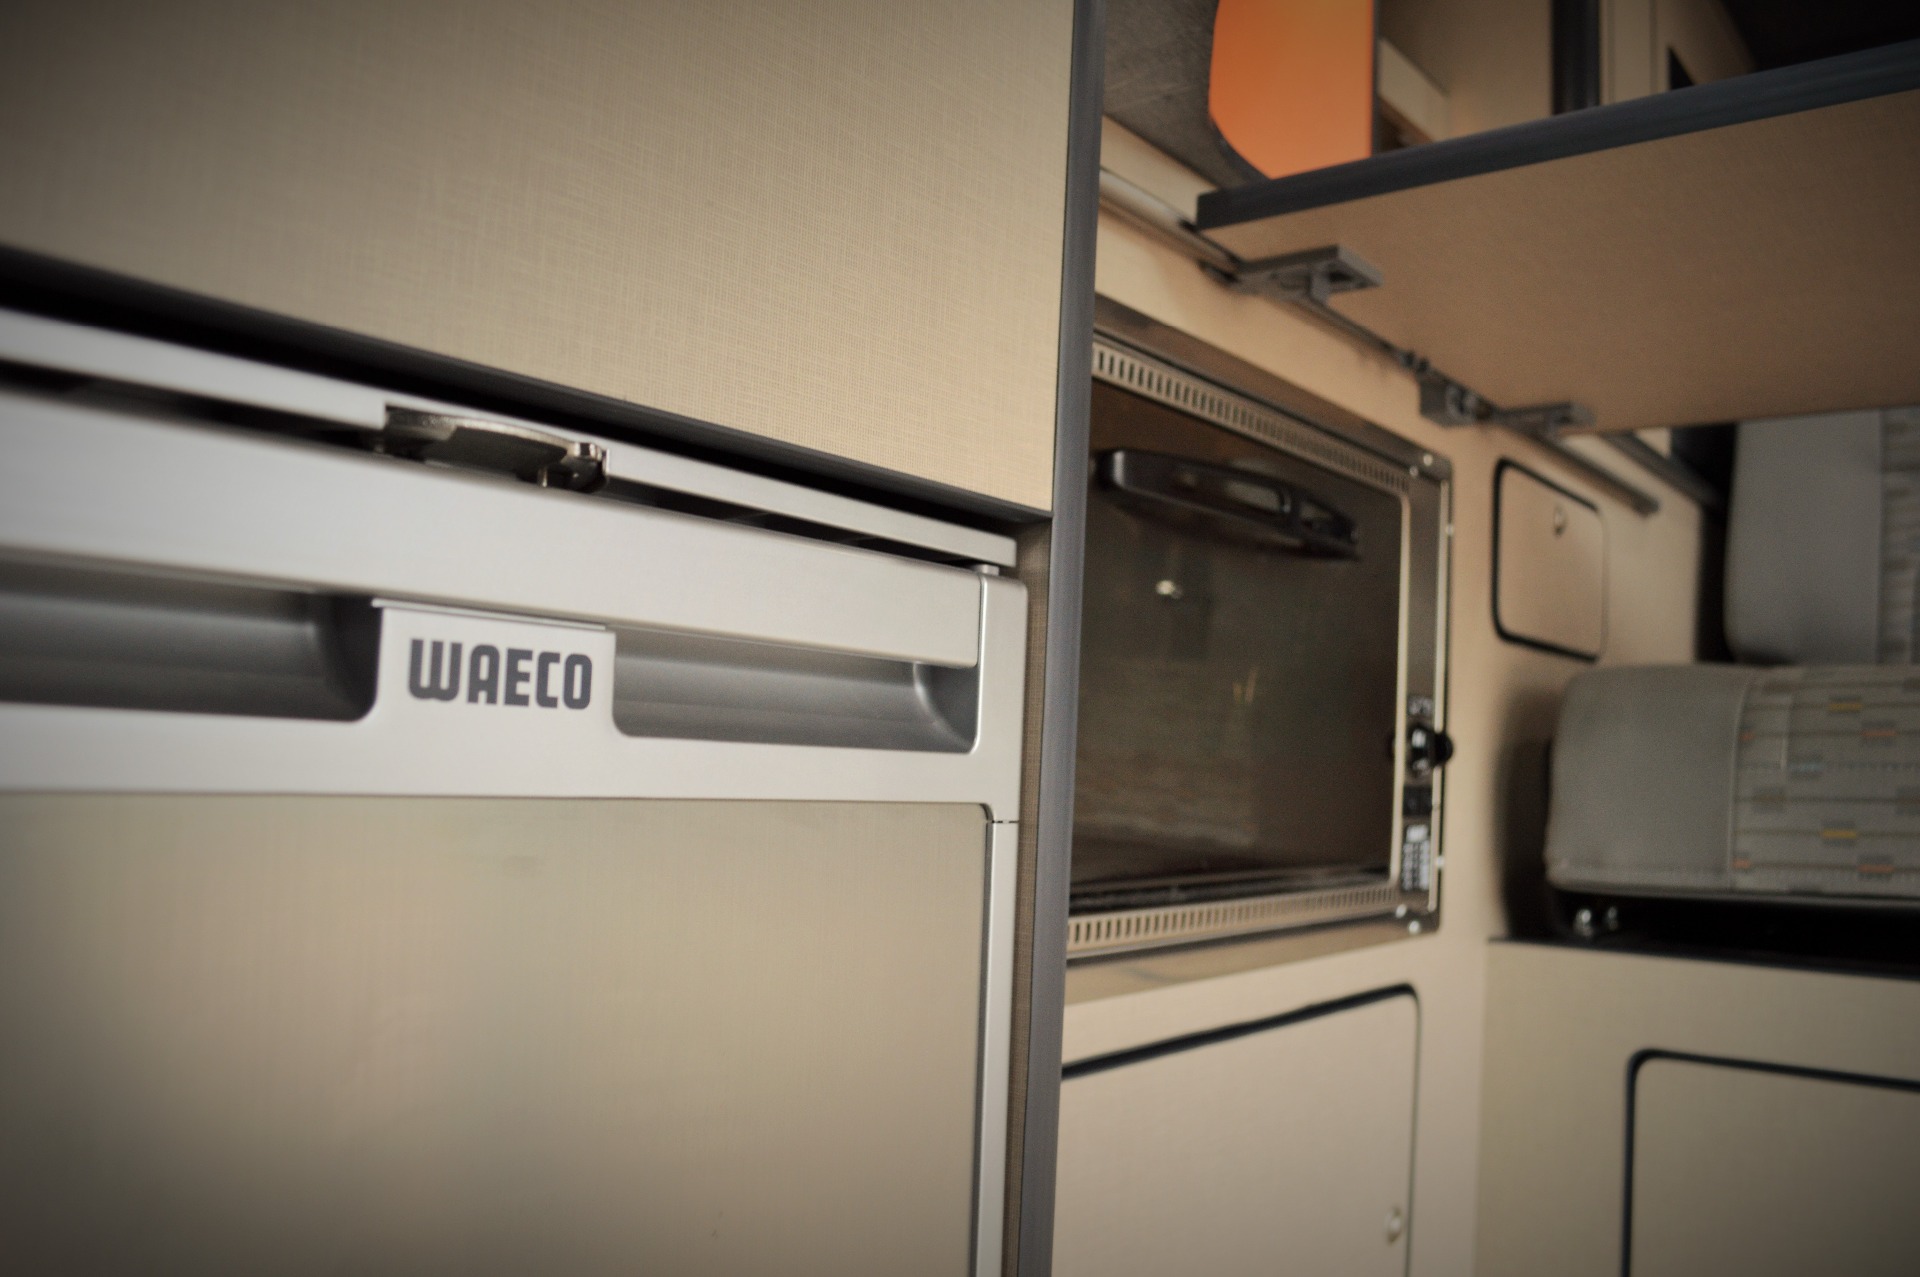 The brand new Waeco CRX50 fridge and 20litre Smev oven/grill